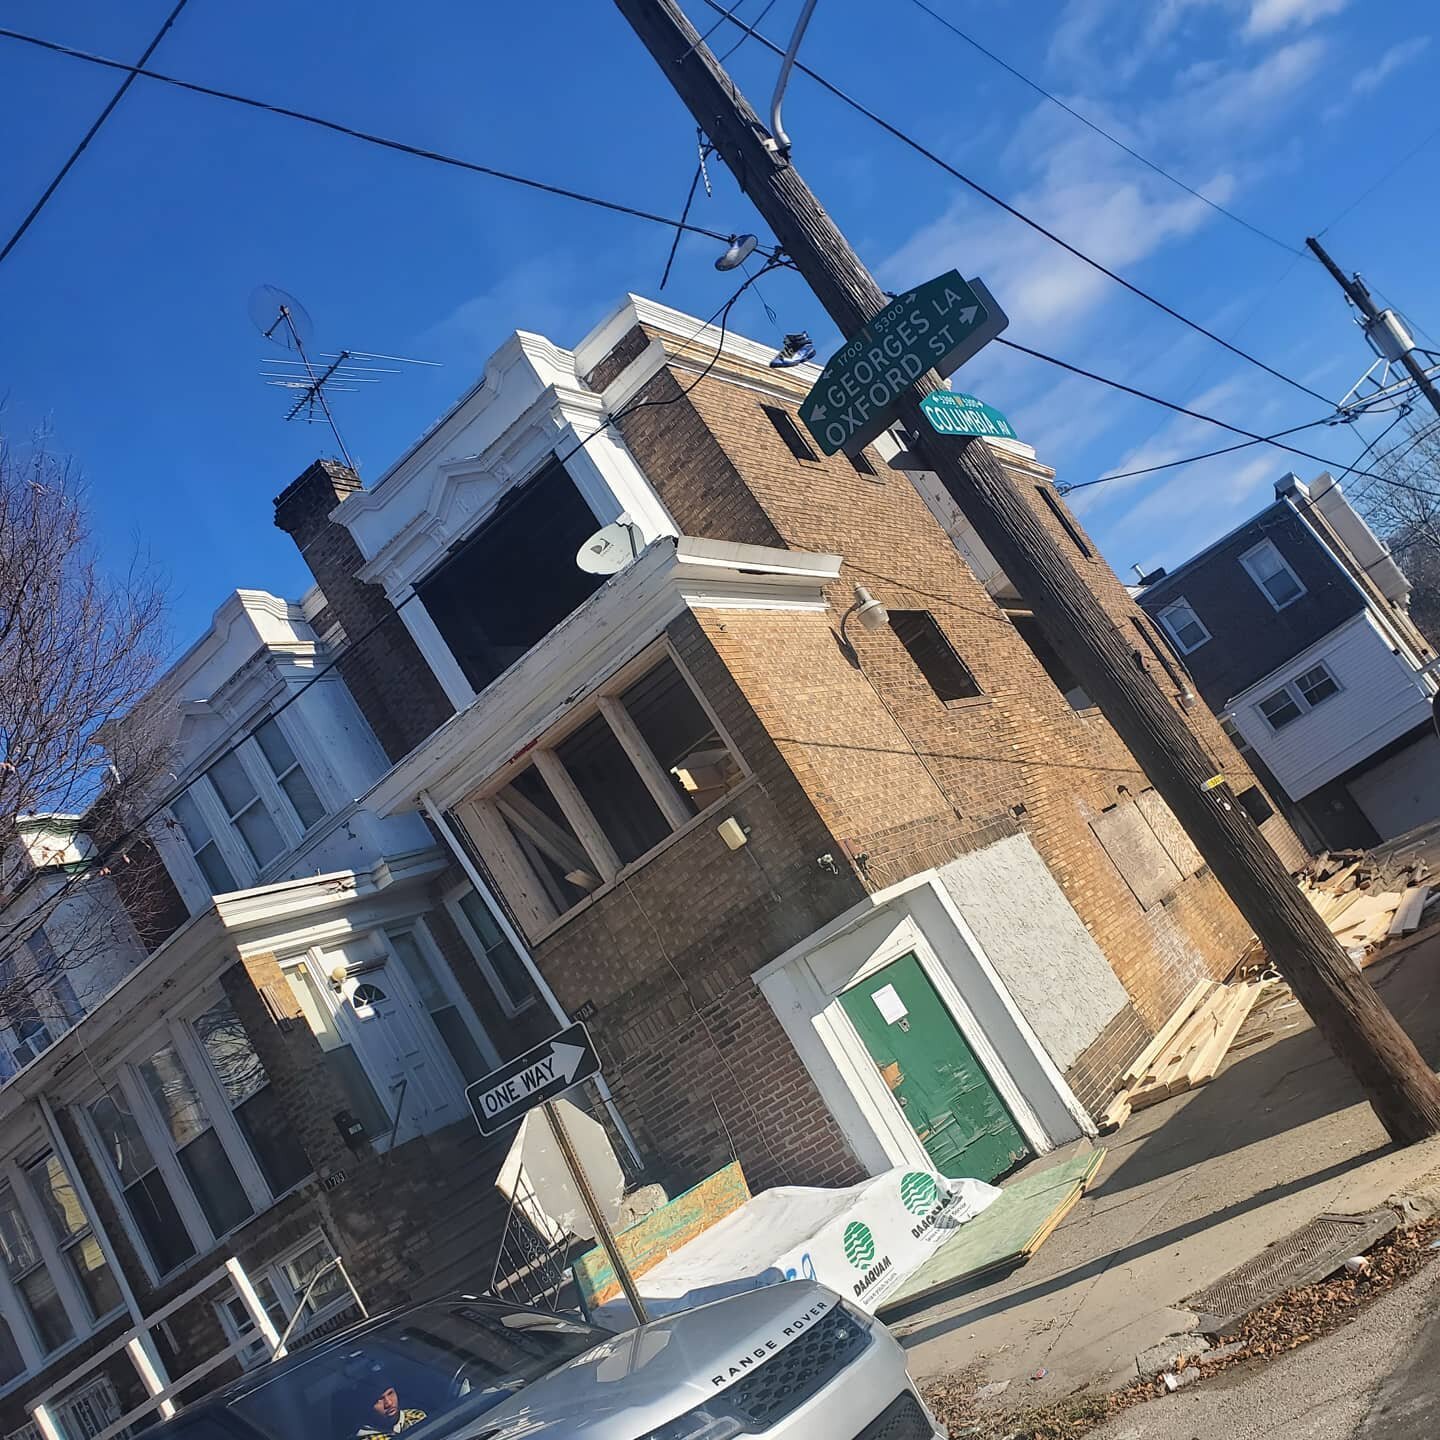 Triplex coming up soon designed by @24_7design_group being built by @iamdarenh 💪💪 #247designgroup #dopearchitects #sitevisit #multifamily #sitemeetings #majorrenovation #construction #wynnfield #westphilly #comingsoon